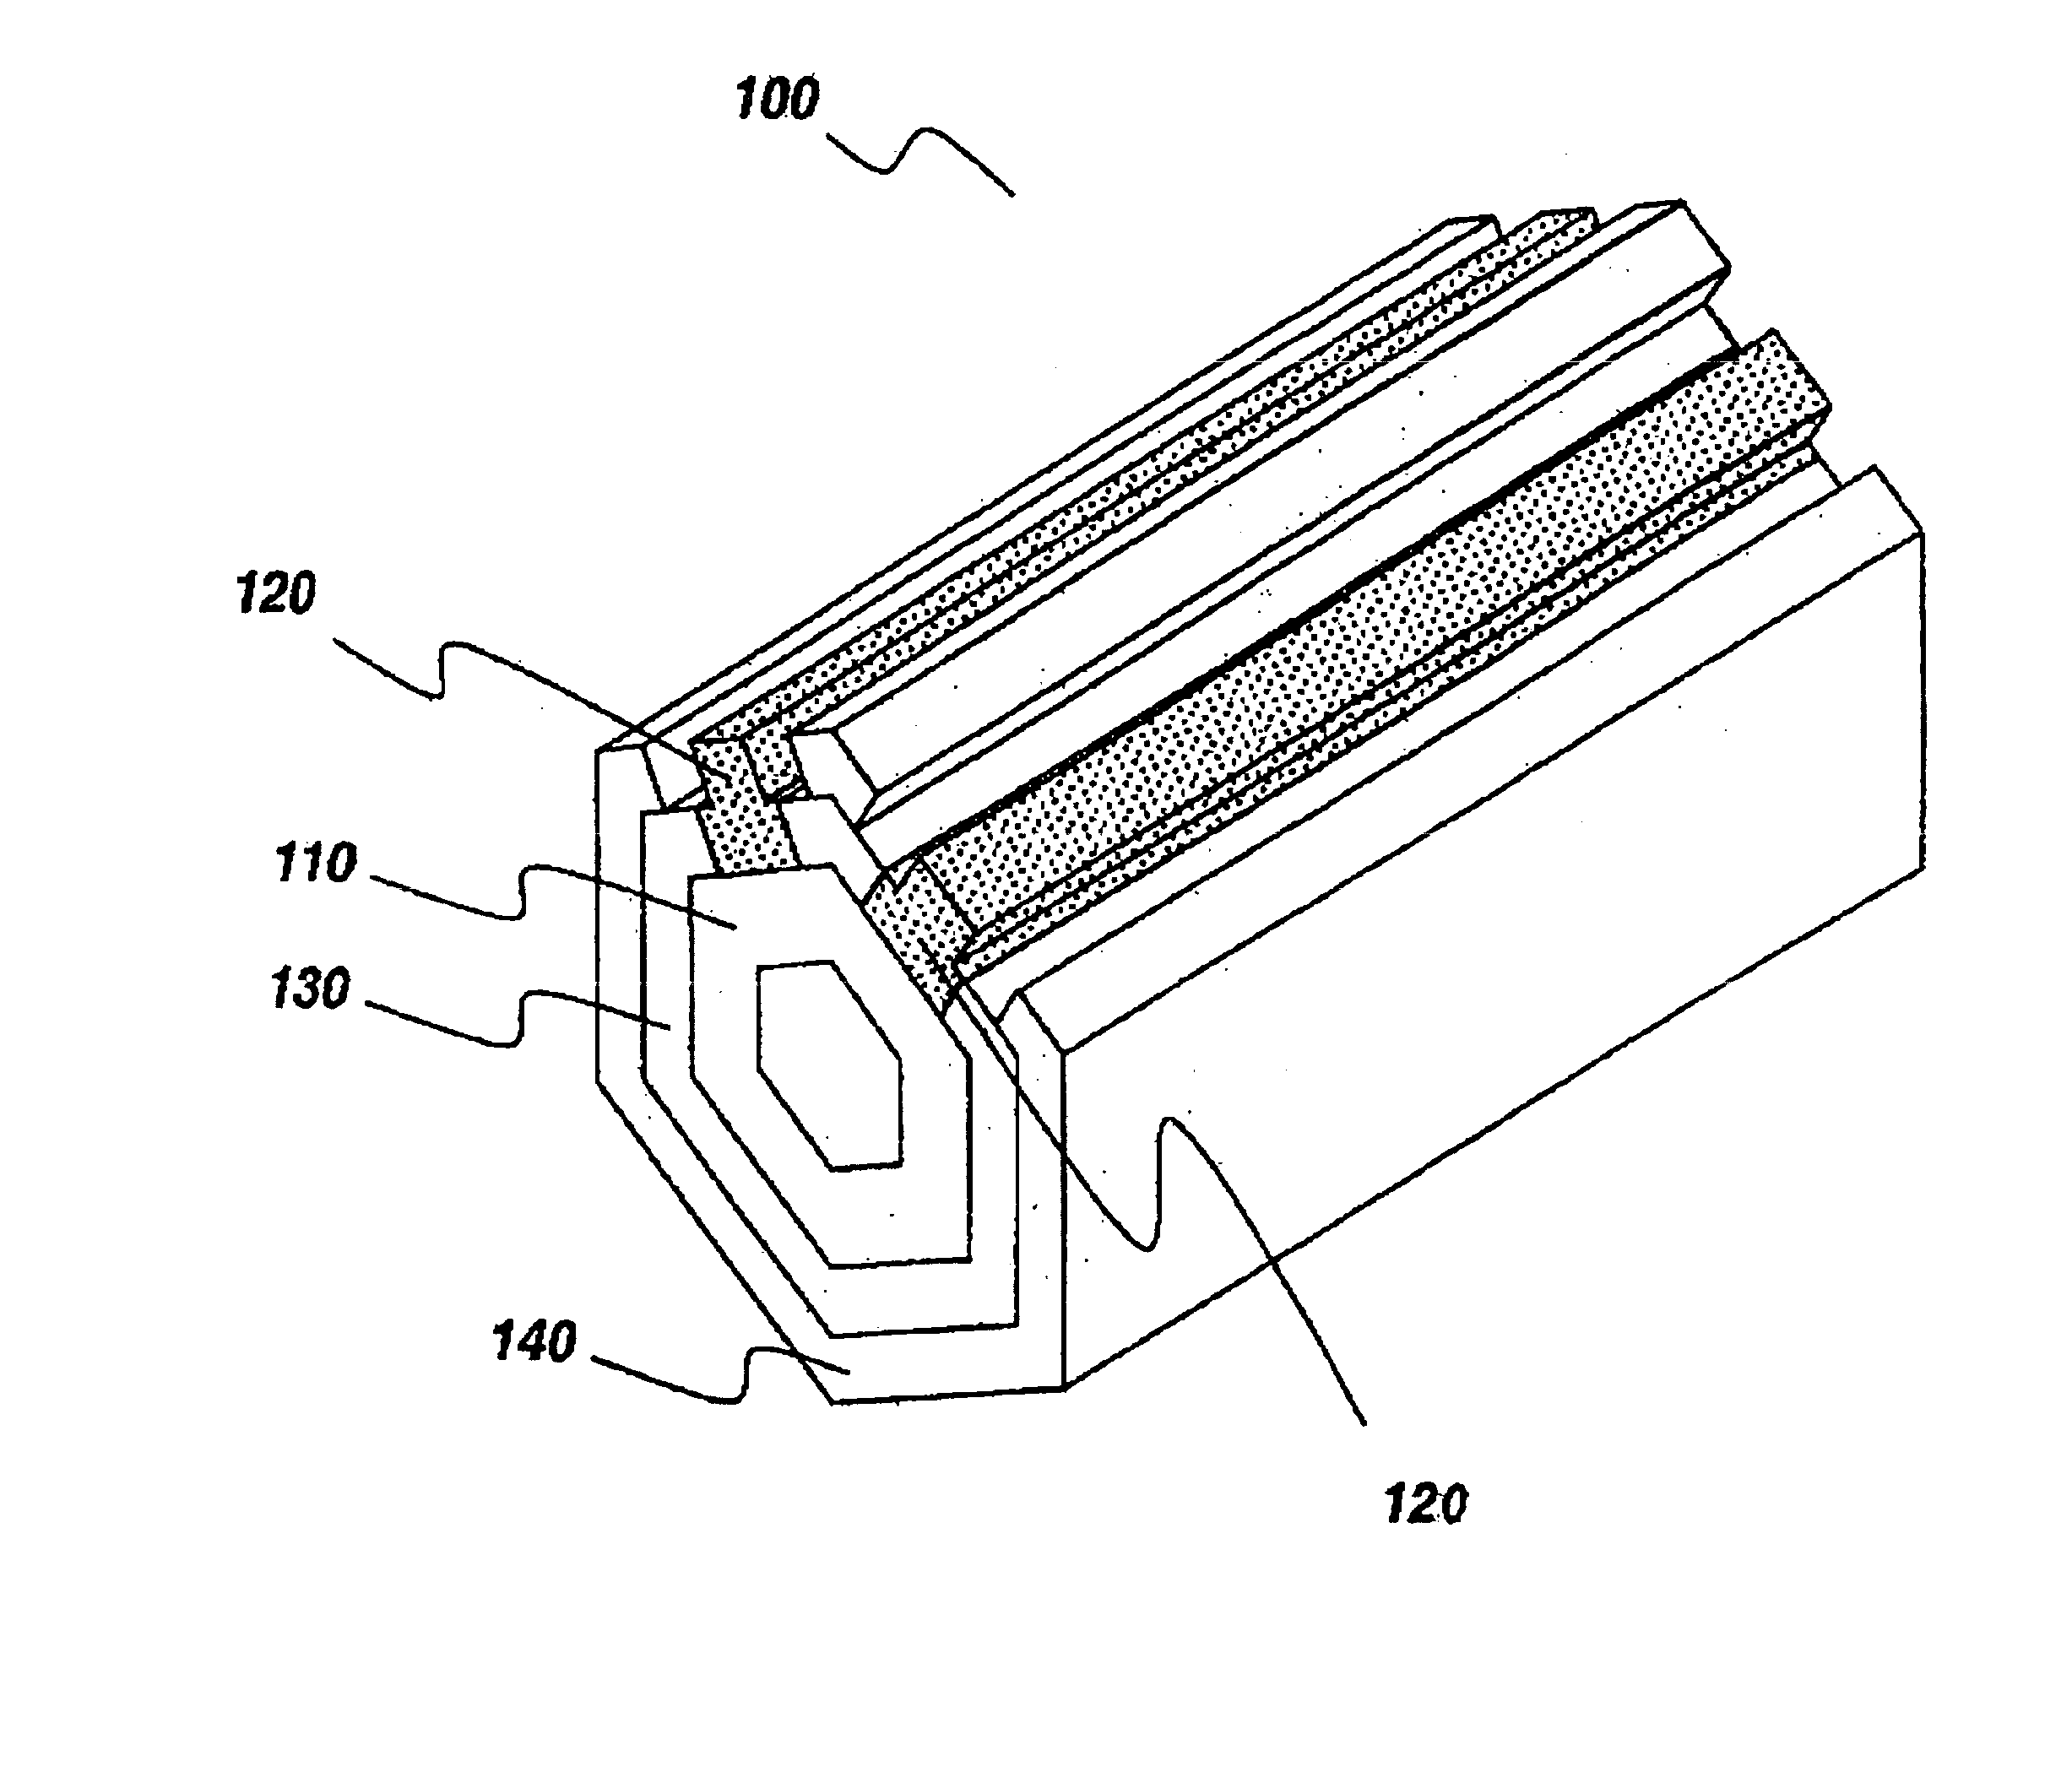 Polygonal fuel cell apparatus and method of making